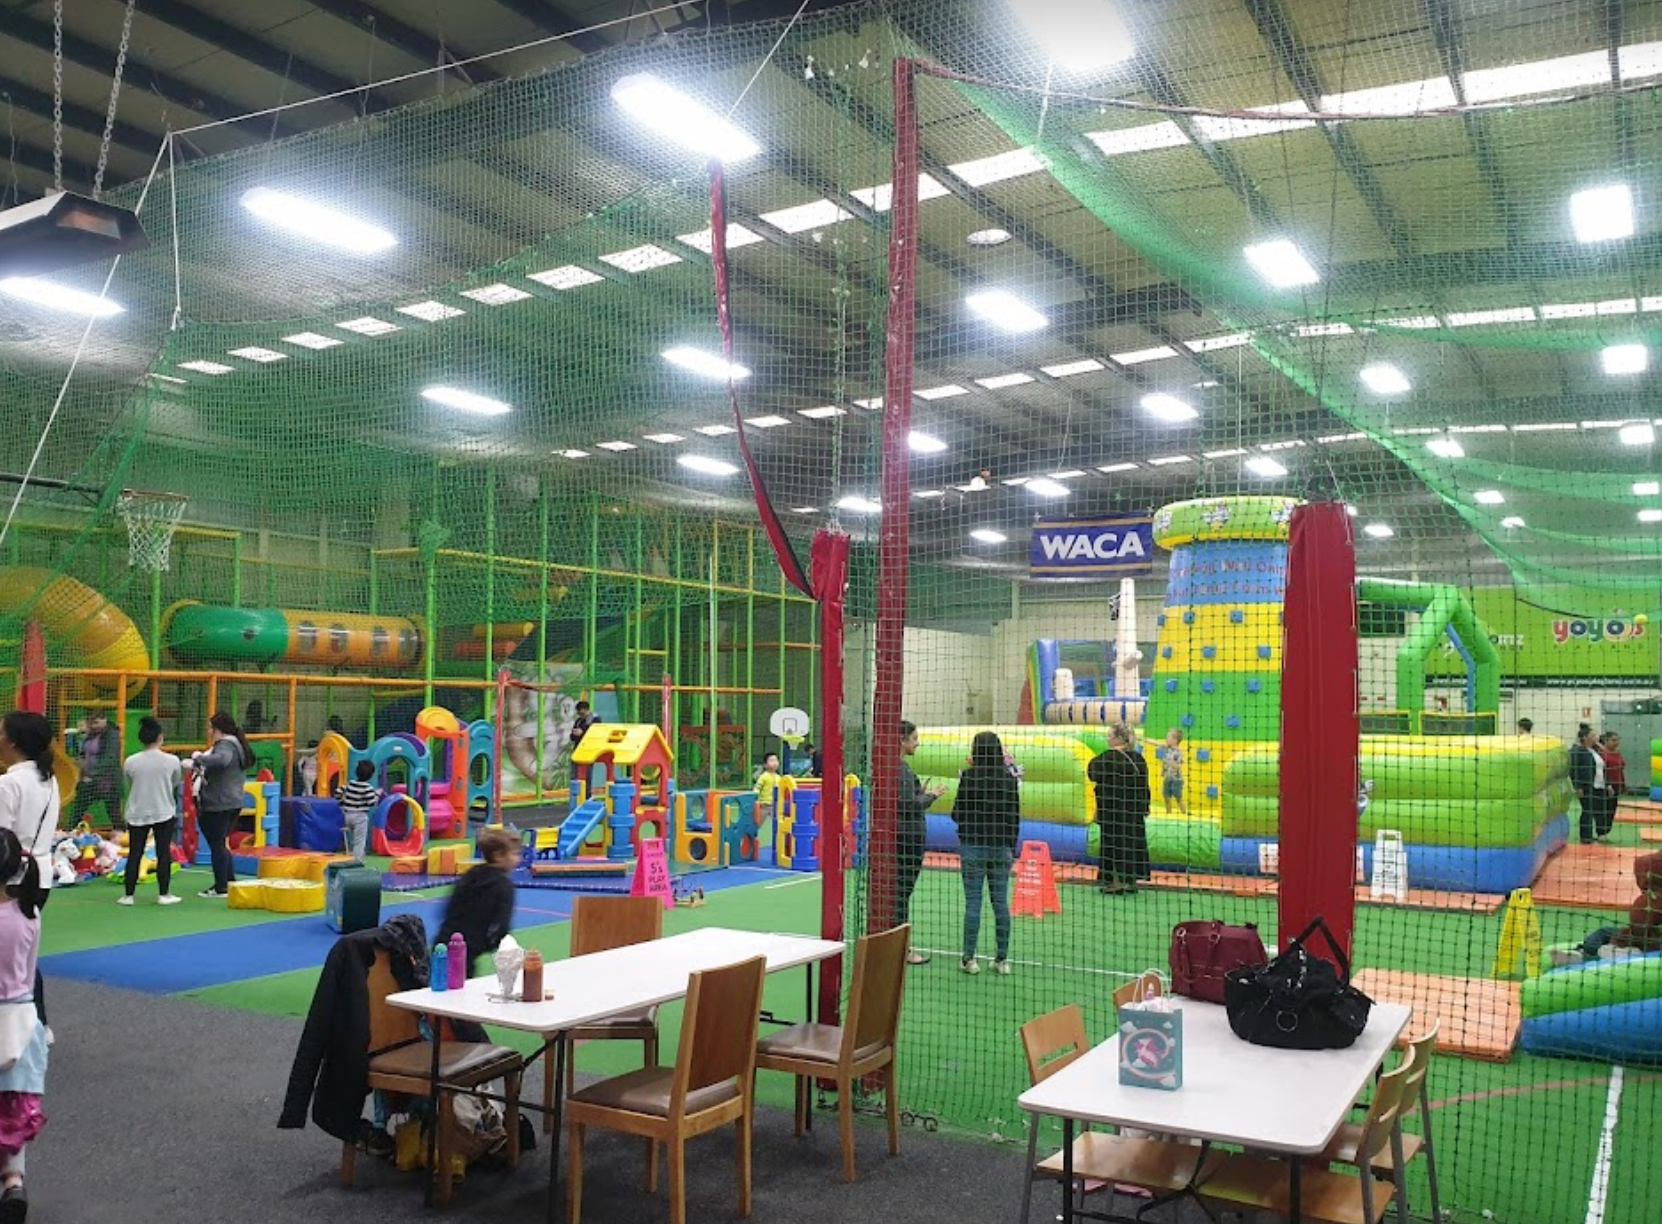 Inflatable World (Wantirna South)